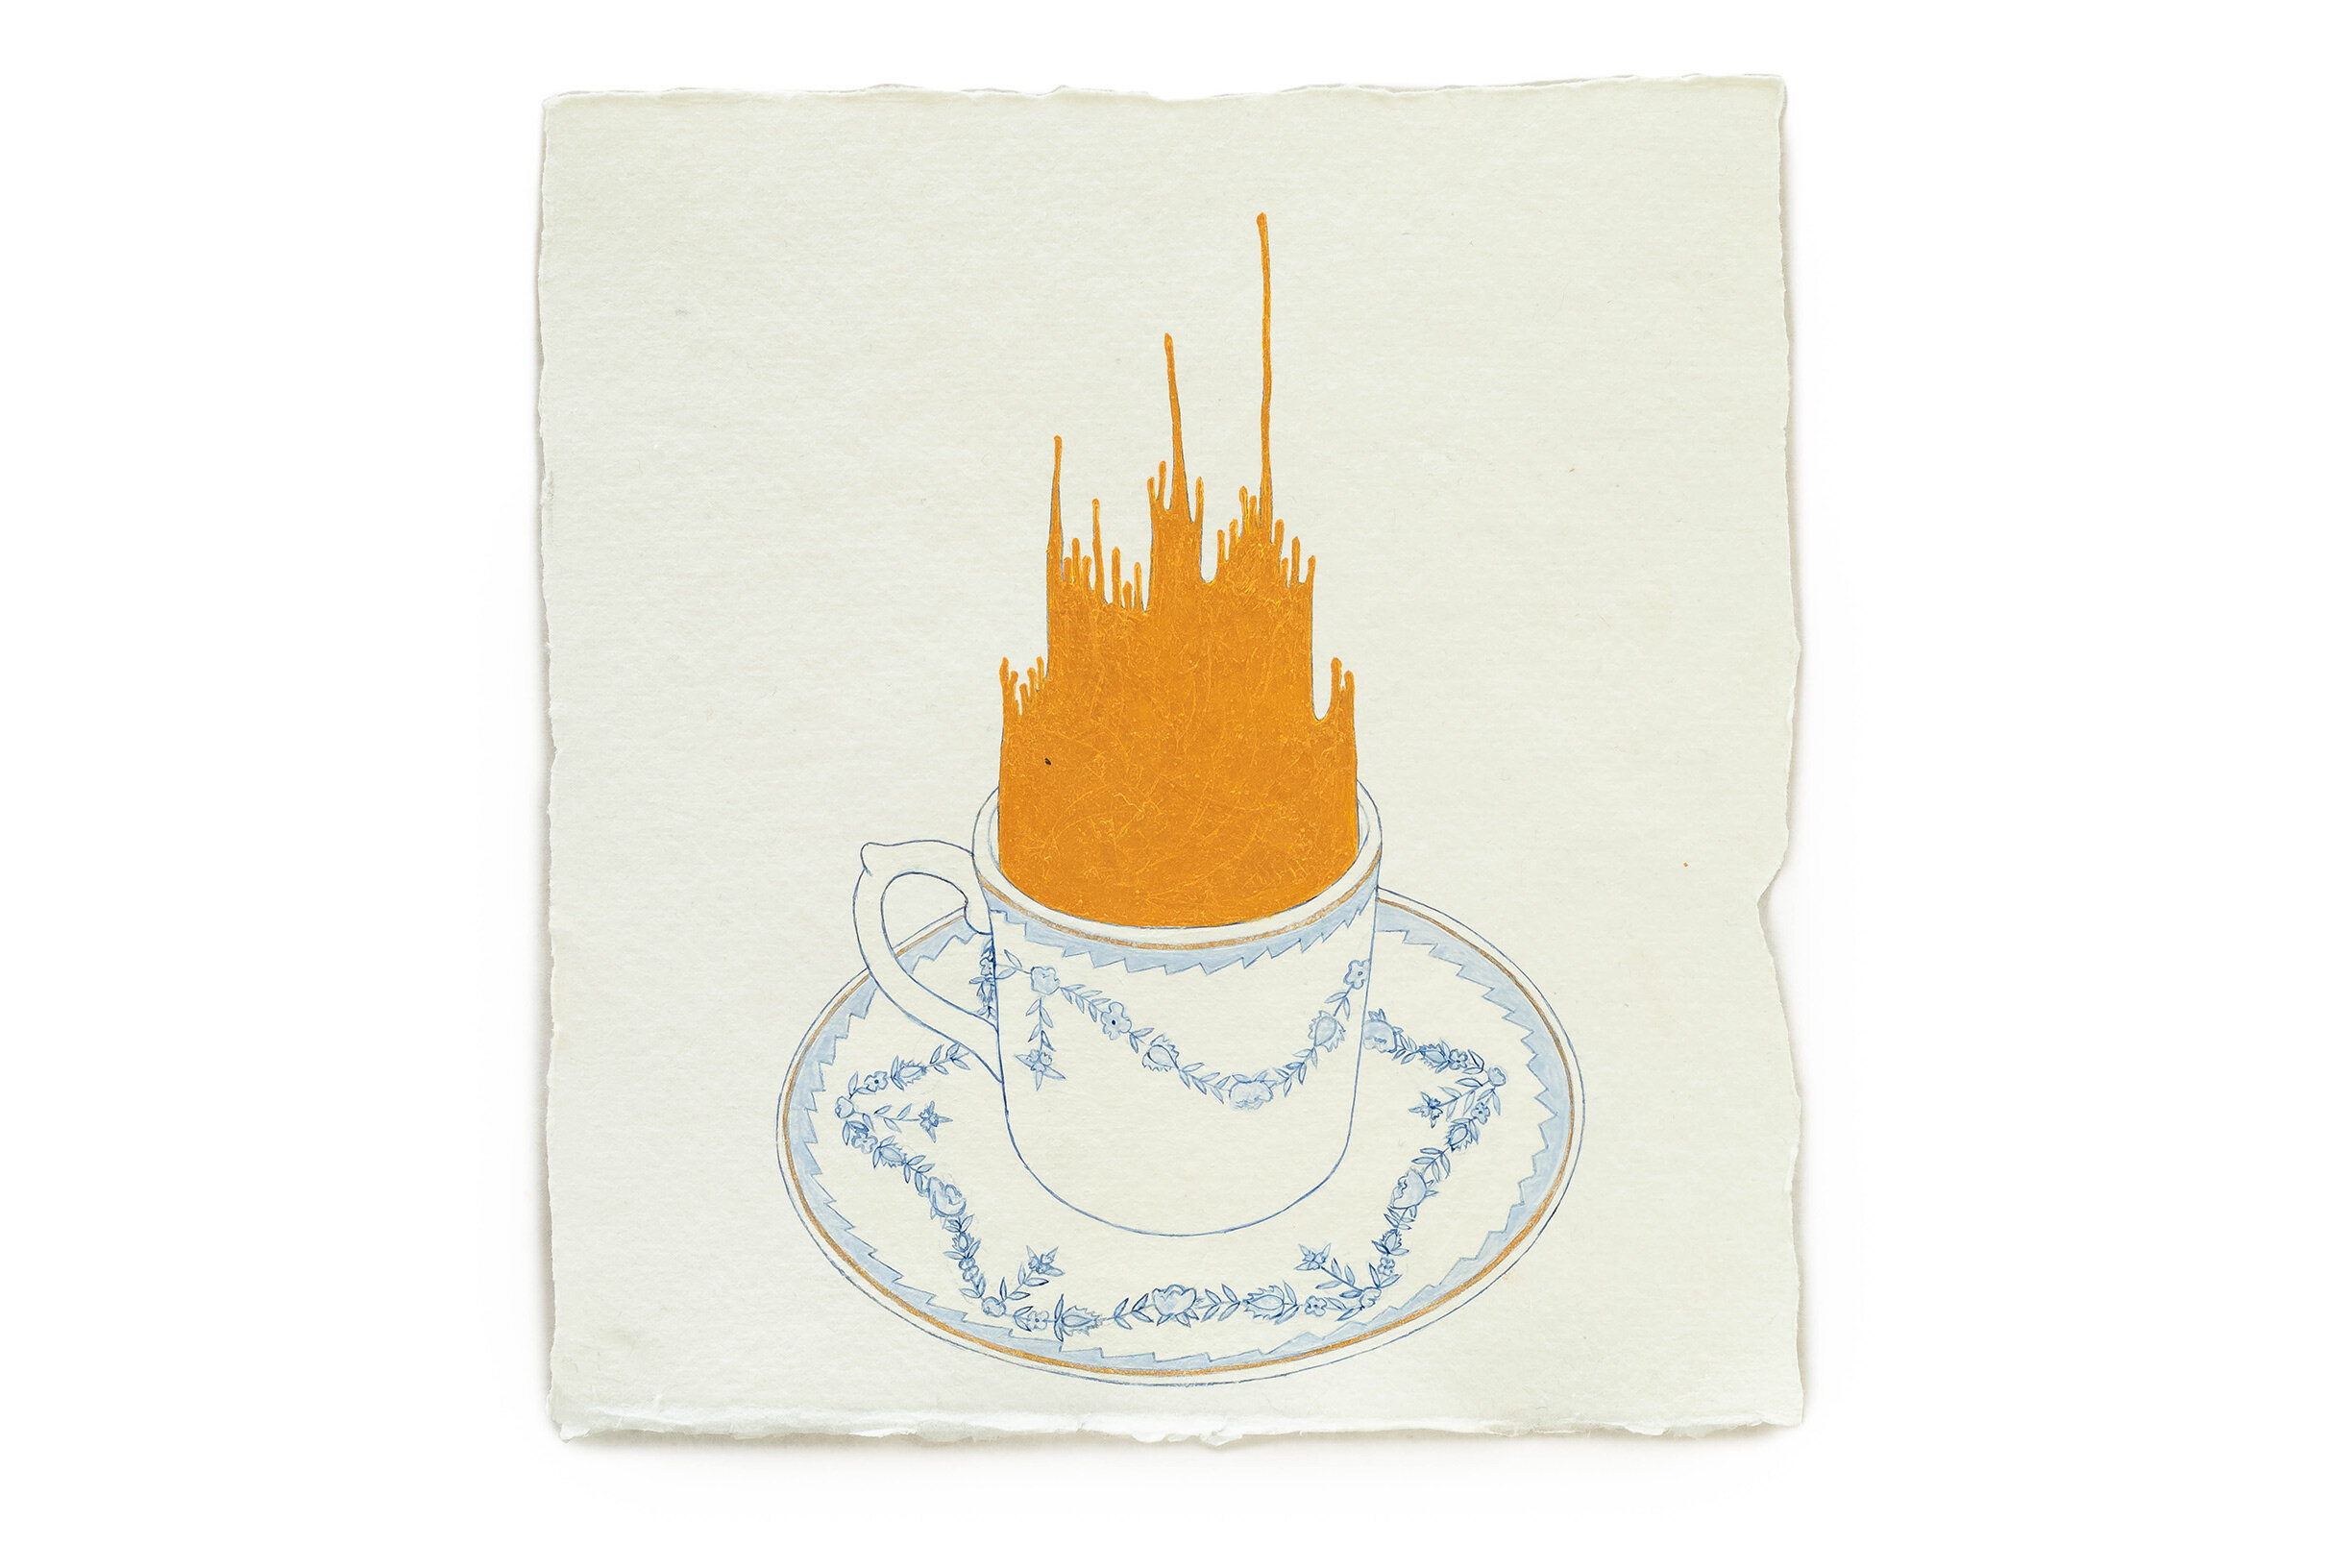   Fire Diary (Portuguese Cups),  2020 Acrylic on paper, 6” x 6” each 